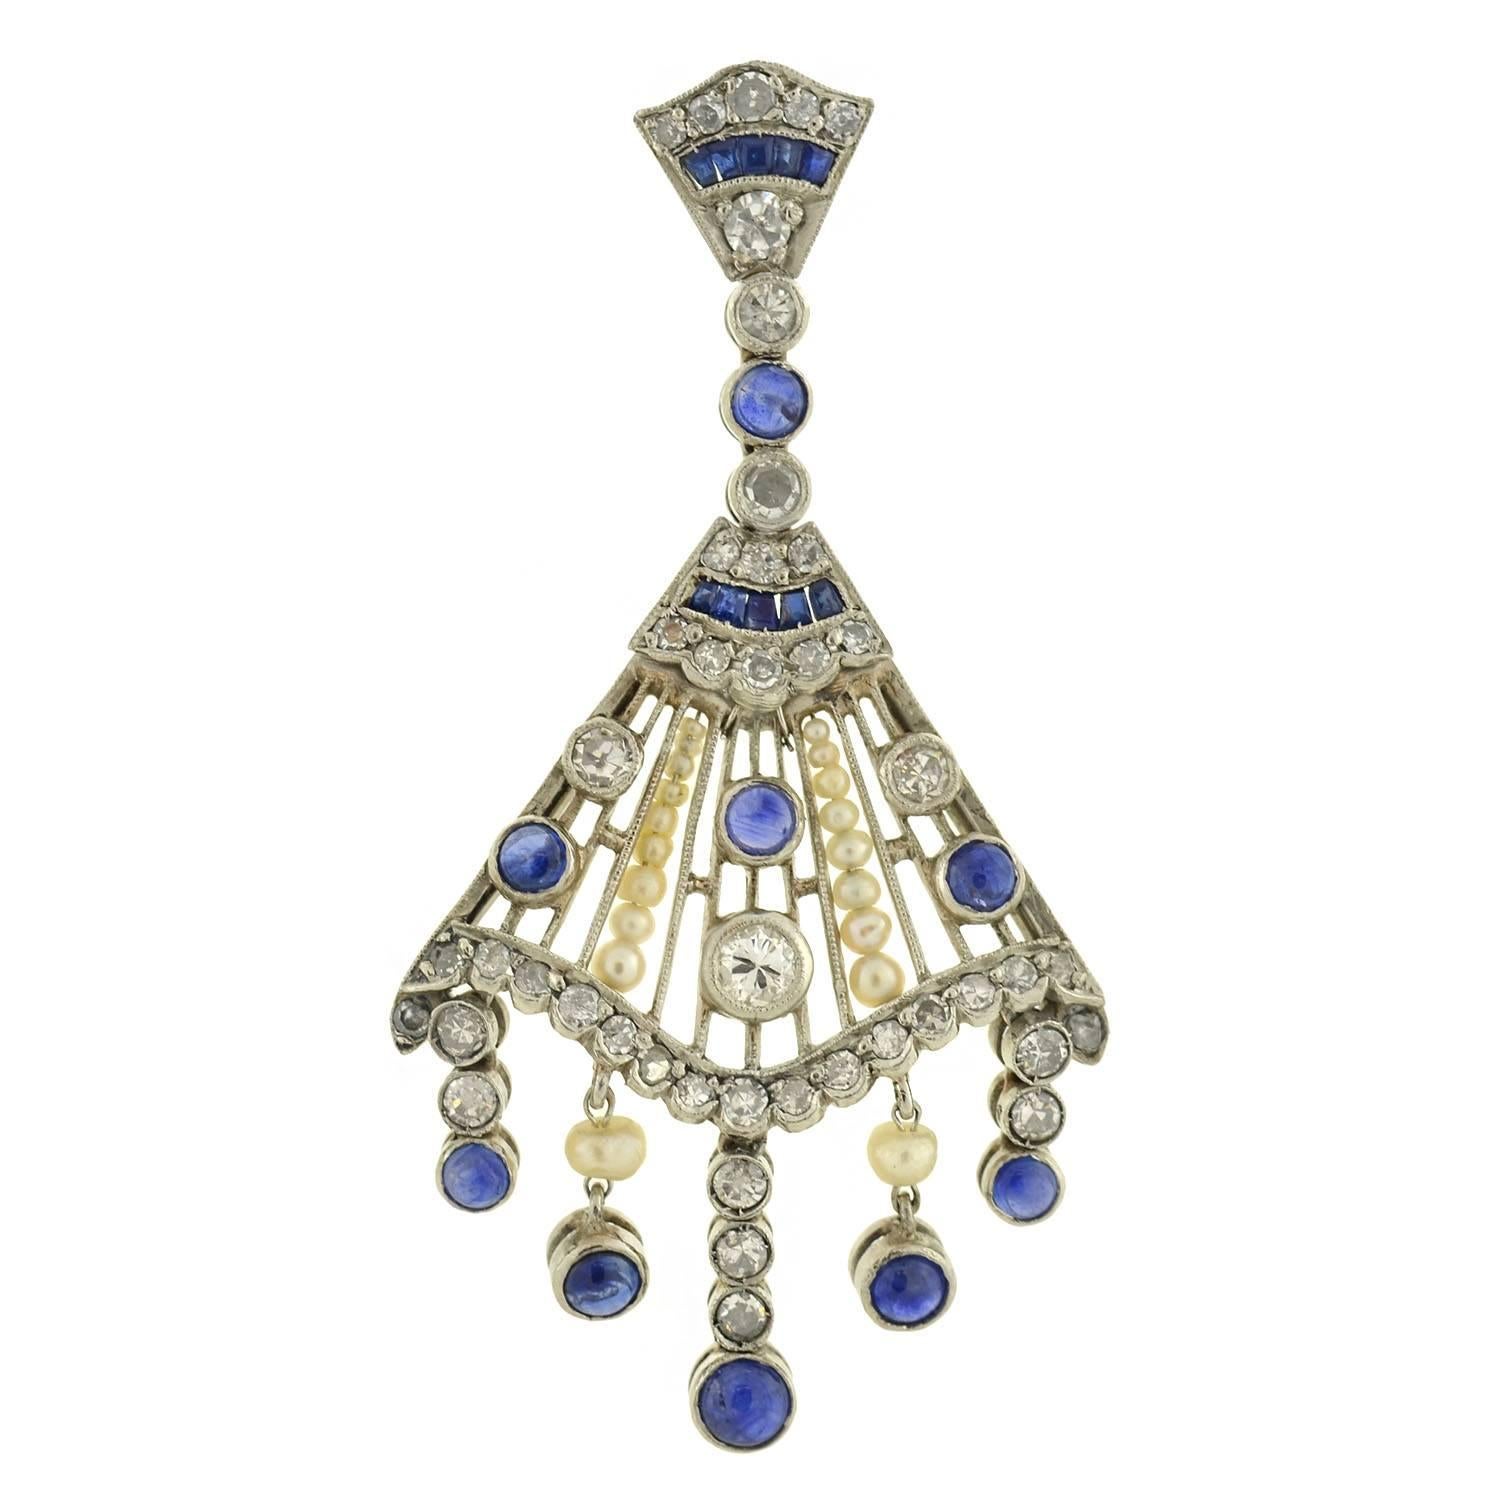 An exquisite pair of chandelier earrings! These incredible fan-shaped earrings are crafted in platinum and are quite substantial in size and appearance. A combination of sparkling diamonds, luscious cabochon sapphires, and natural seed pearls cover